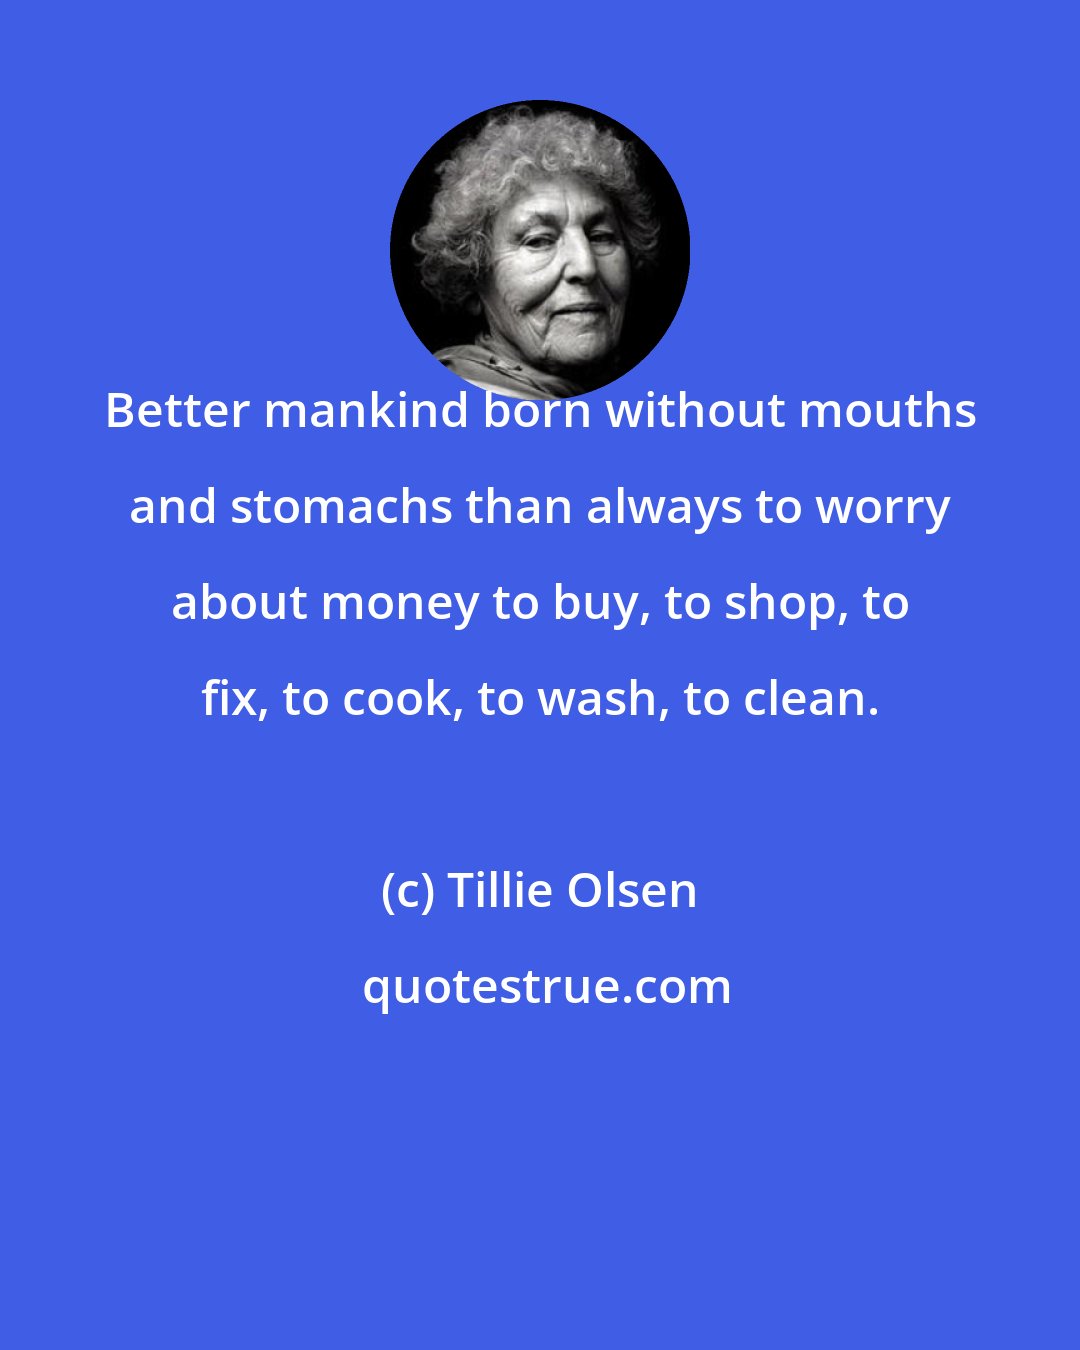 Tillie Olsen: Better mankind born without mouths and stomachs than always to worry about money to buy, to shop, to fix, to cook, to wash, to clean.